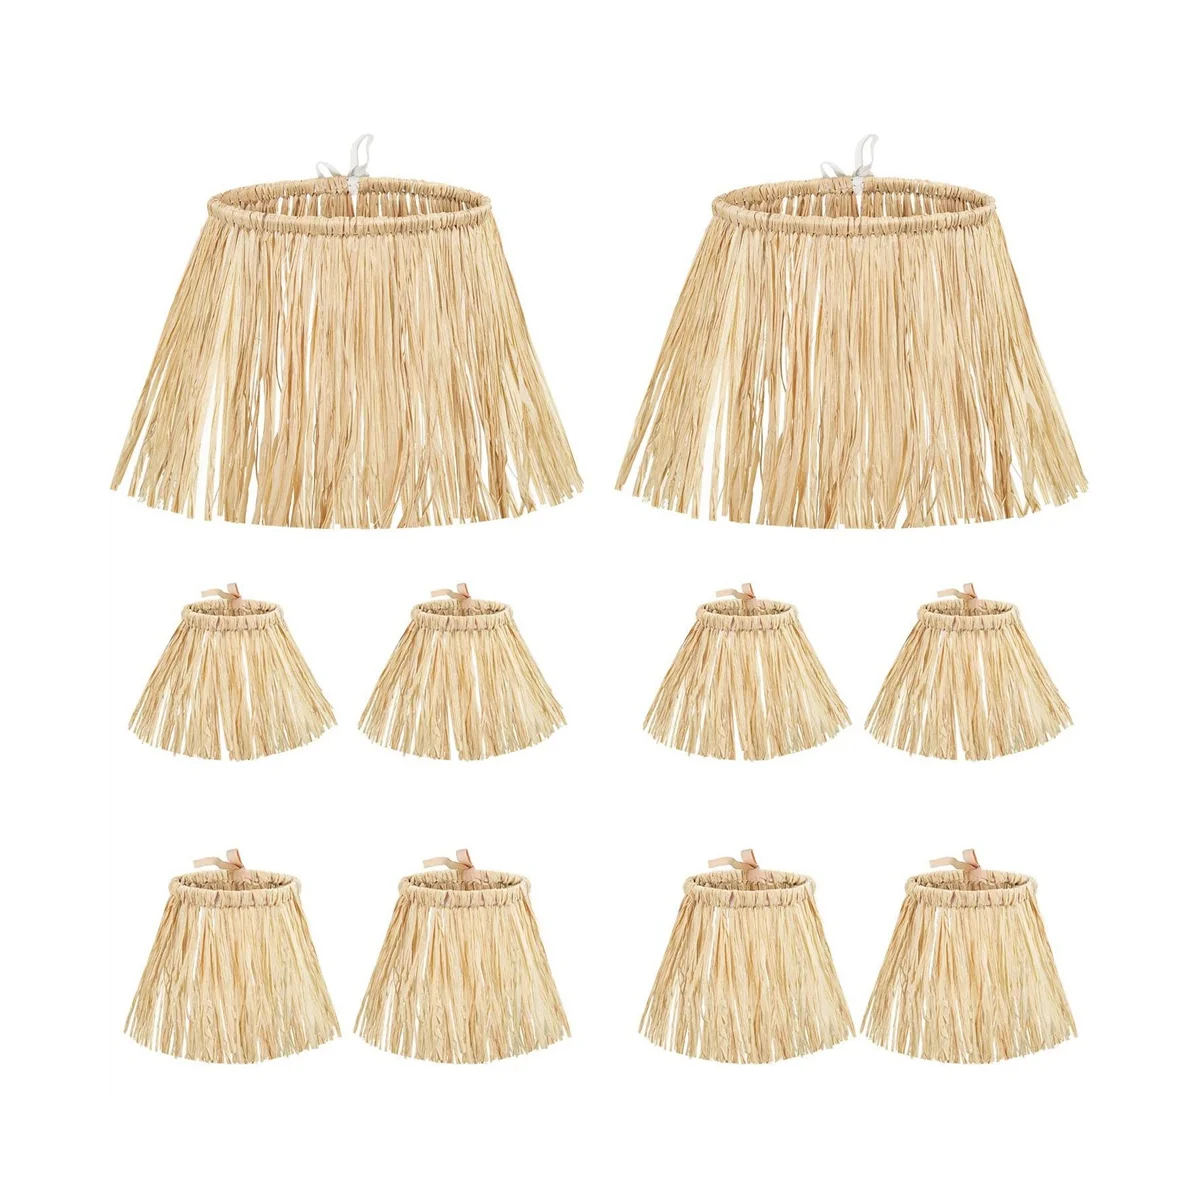 

10 Pieces Scarecrow Straw Kit Raffia Material Scarecrow Costume Accessories Decoration Raffia Neck Arm and Ankle Ties